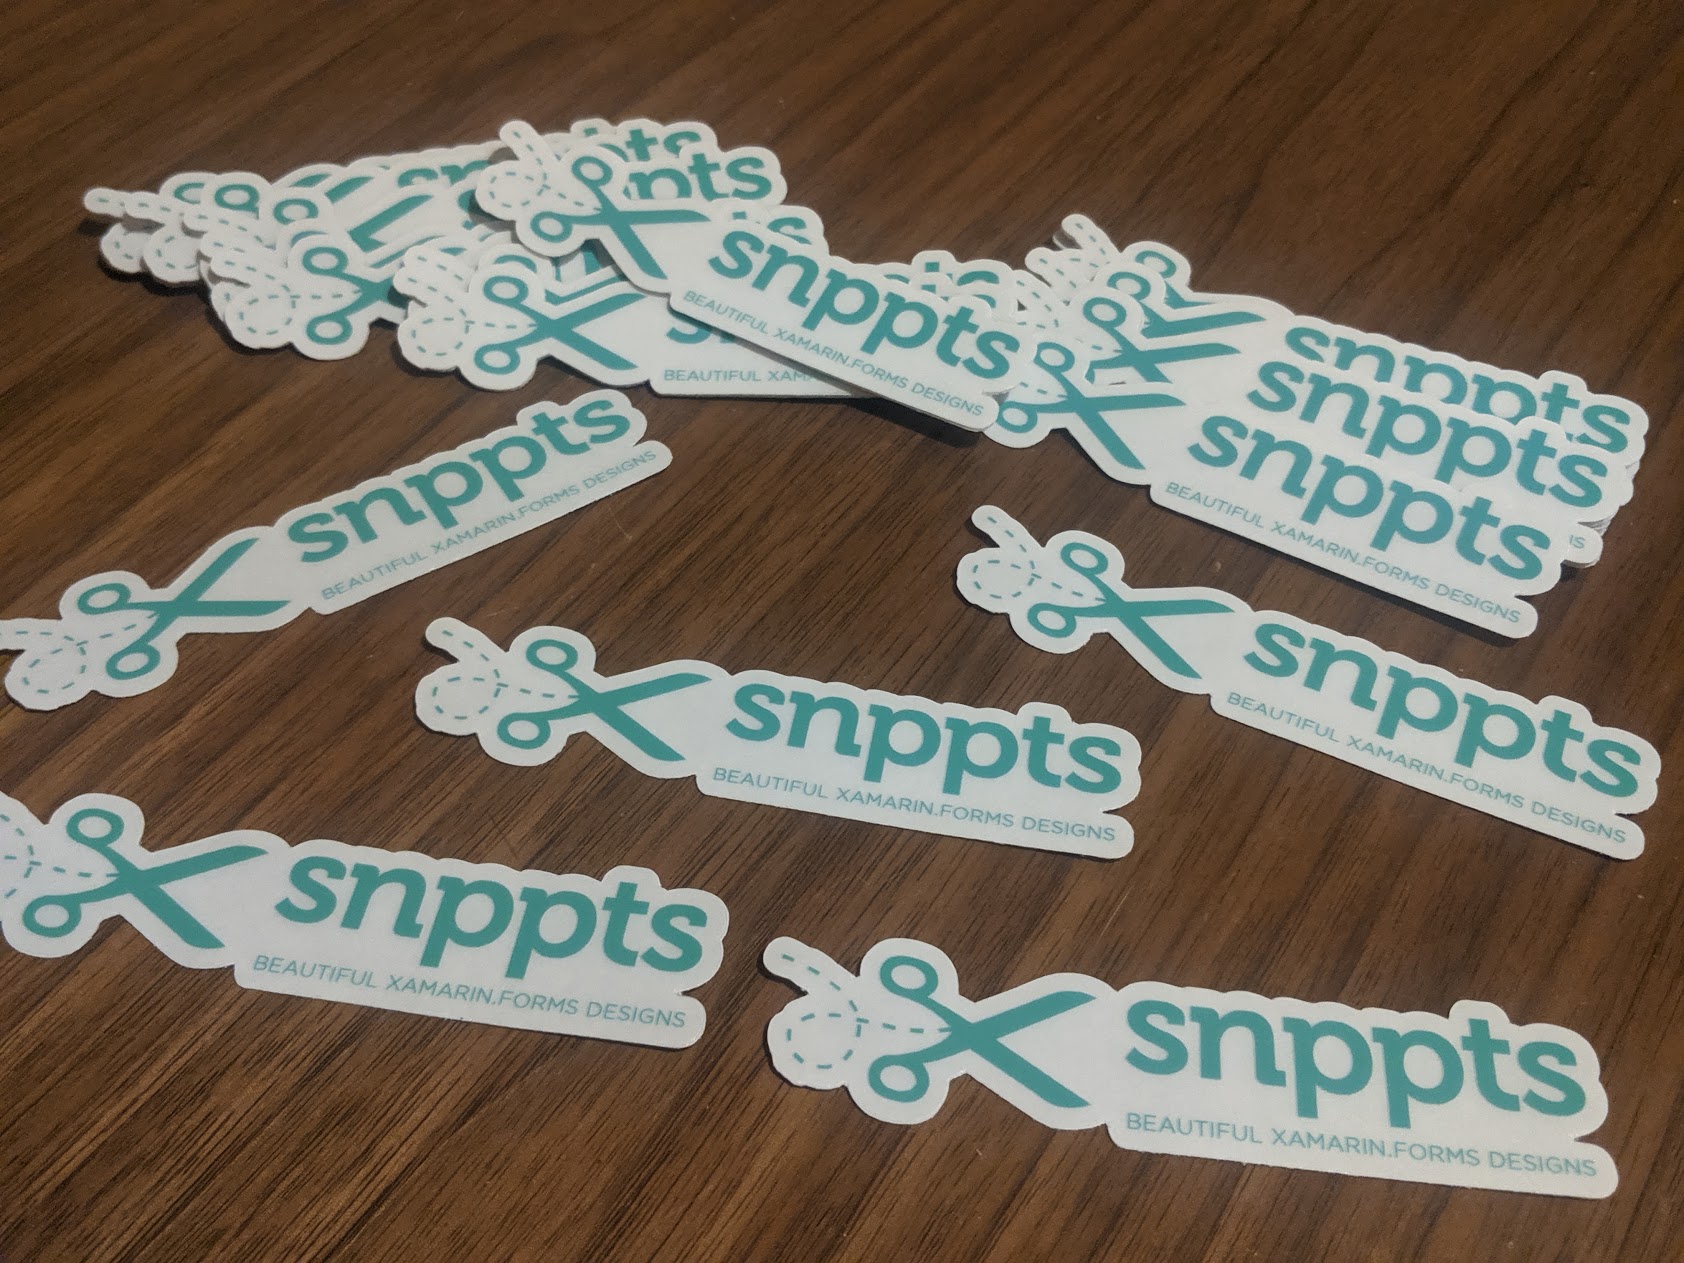 Snppts Swag